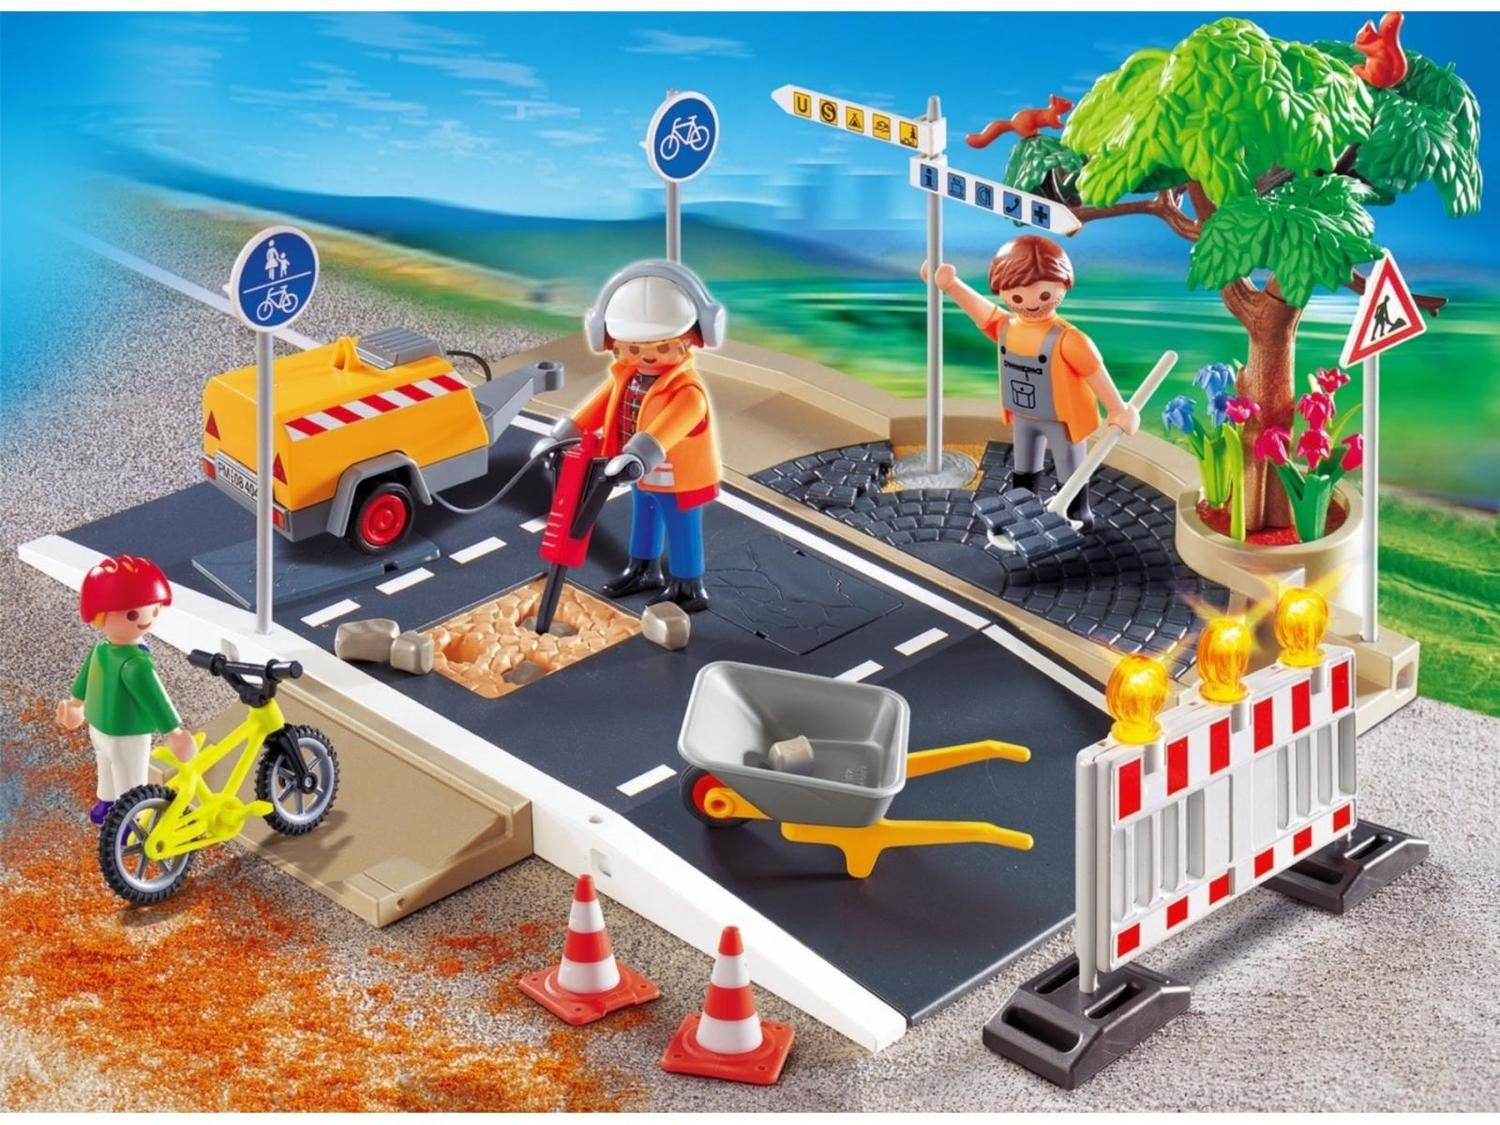 playmobil chantier route